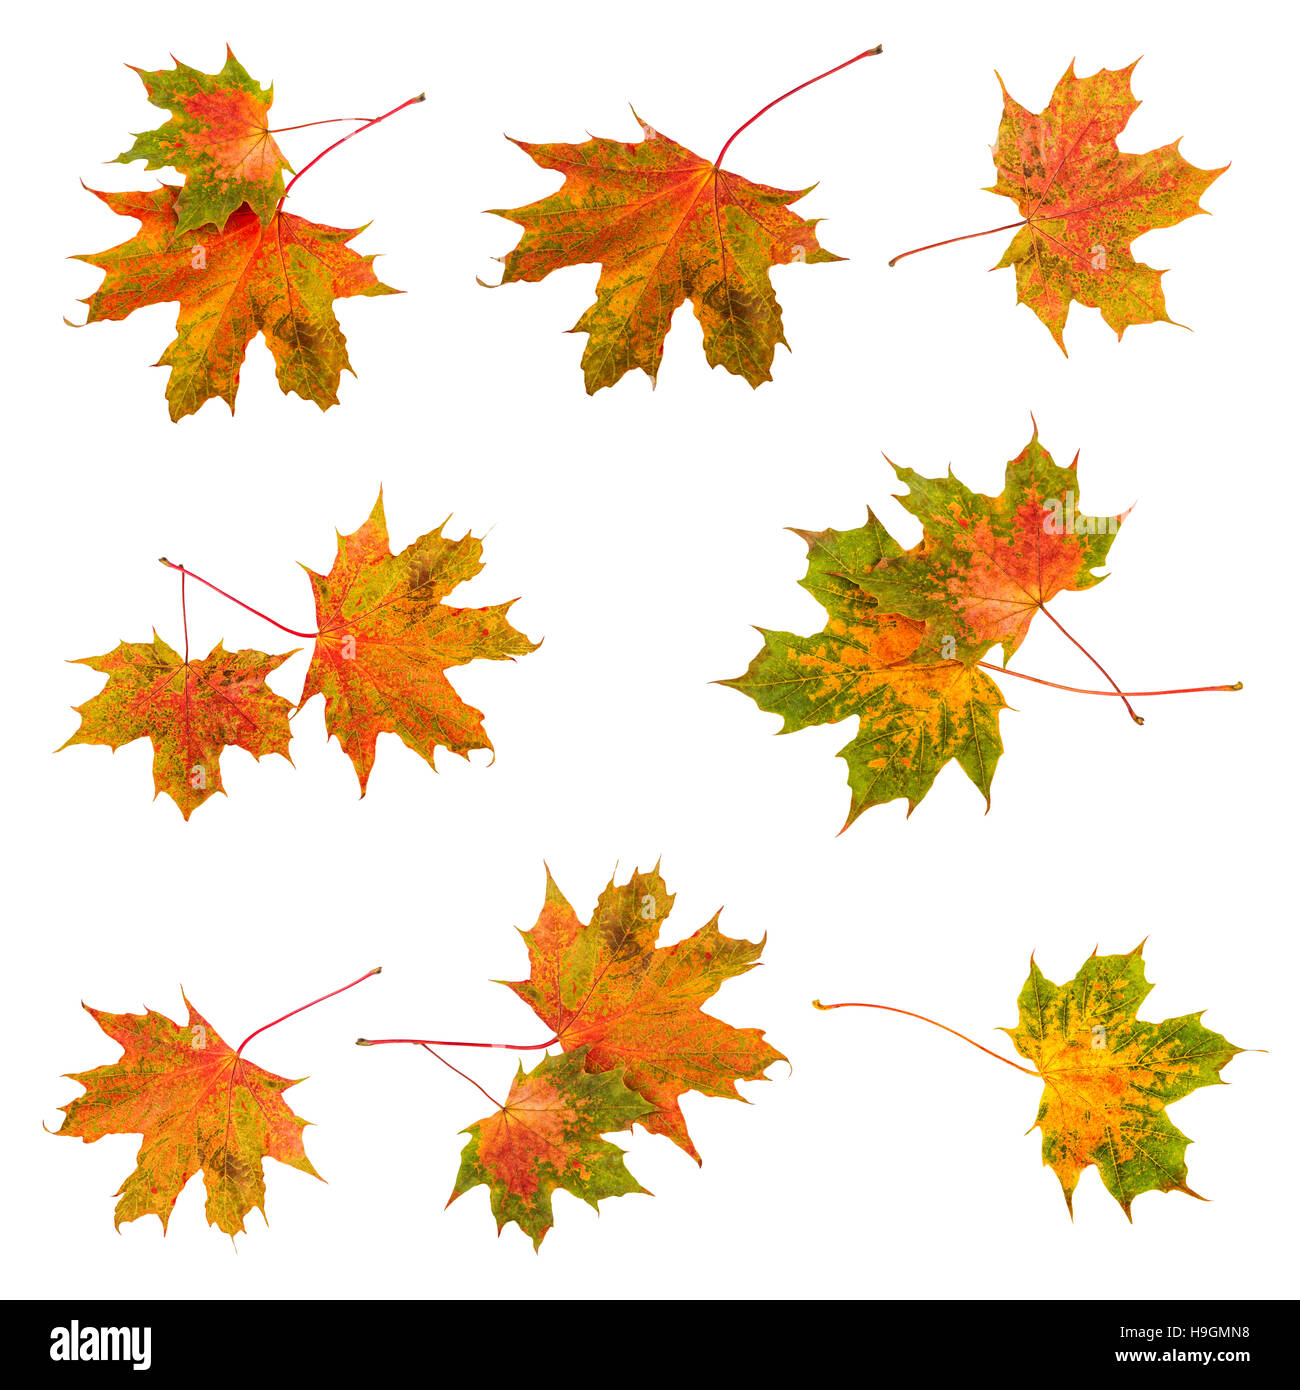 Fall leaf maple leaves set collection. Colorful autumn leaves isolated on white background. Stock Photo